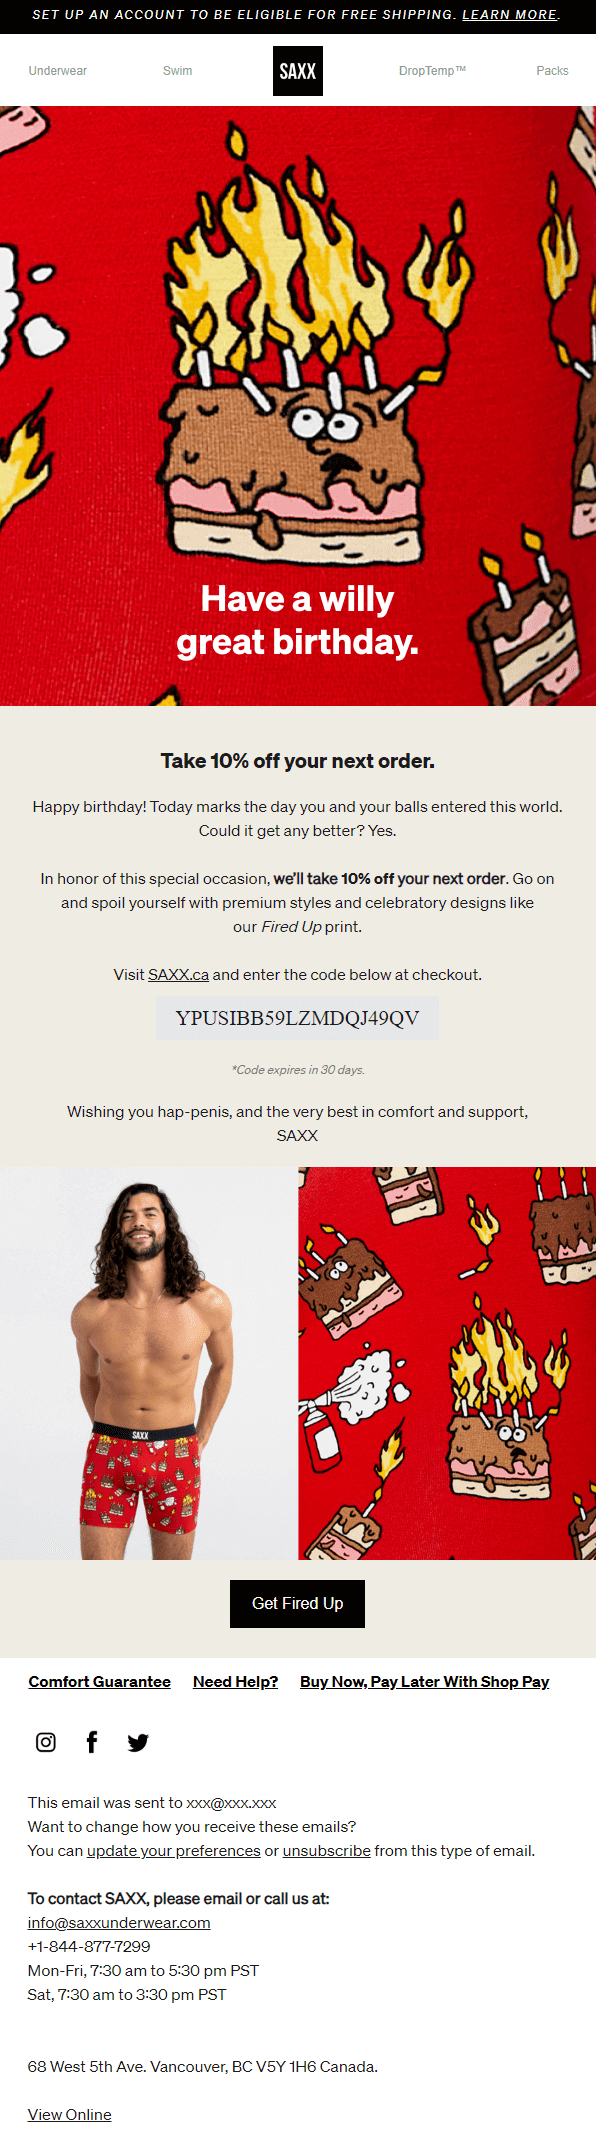 An email with a happy birthday message and a personalized promo code for 10% off